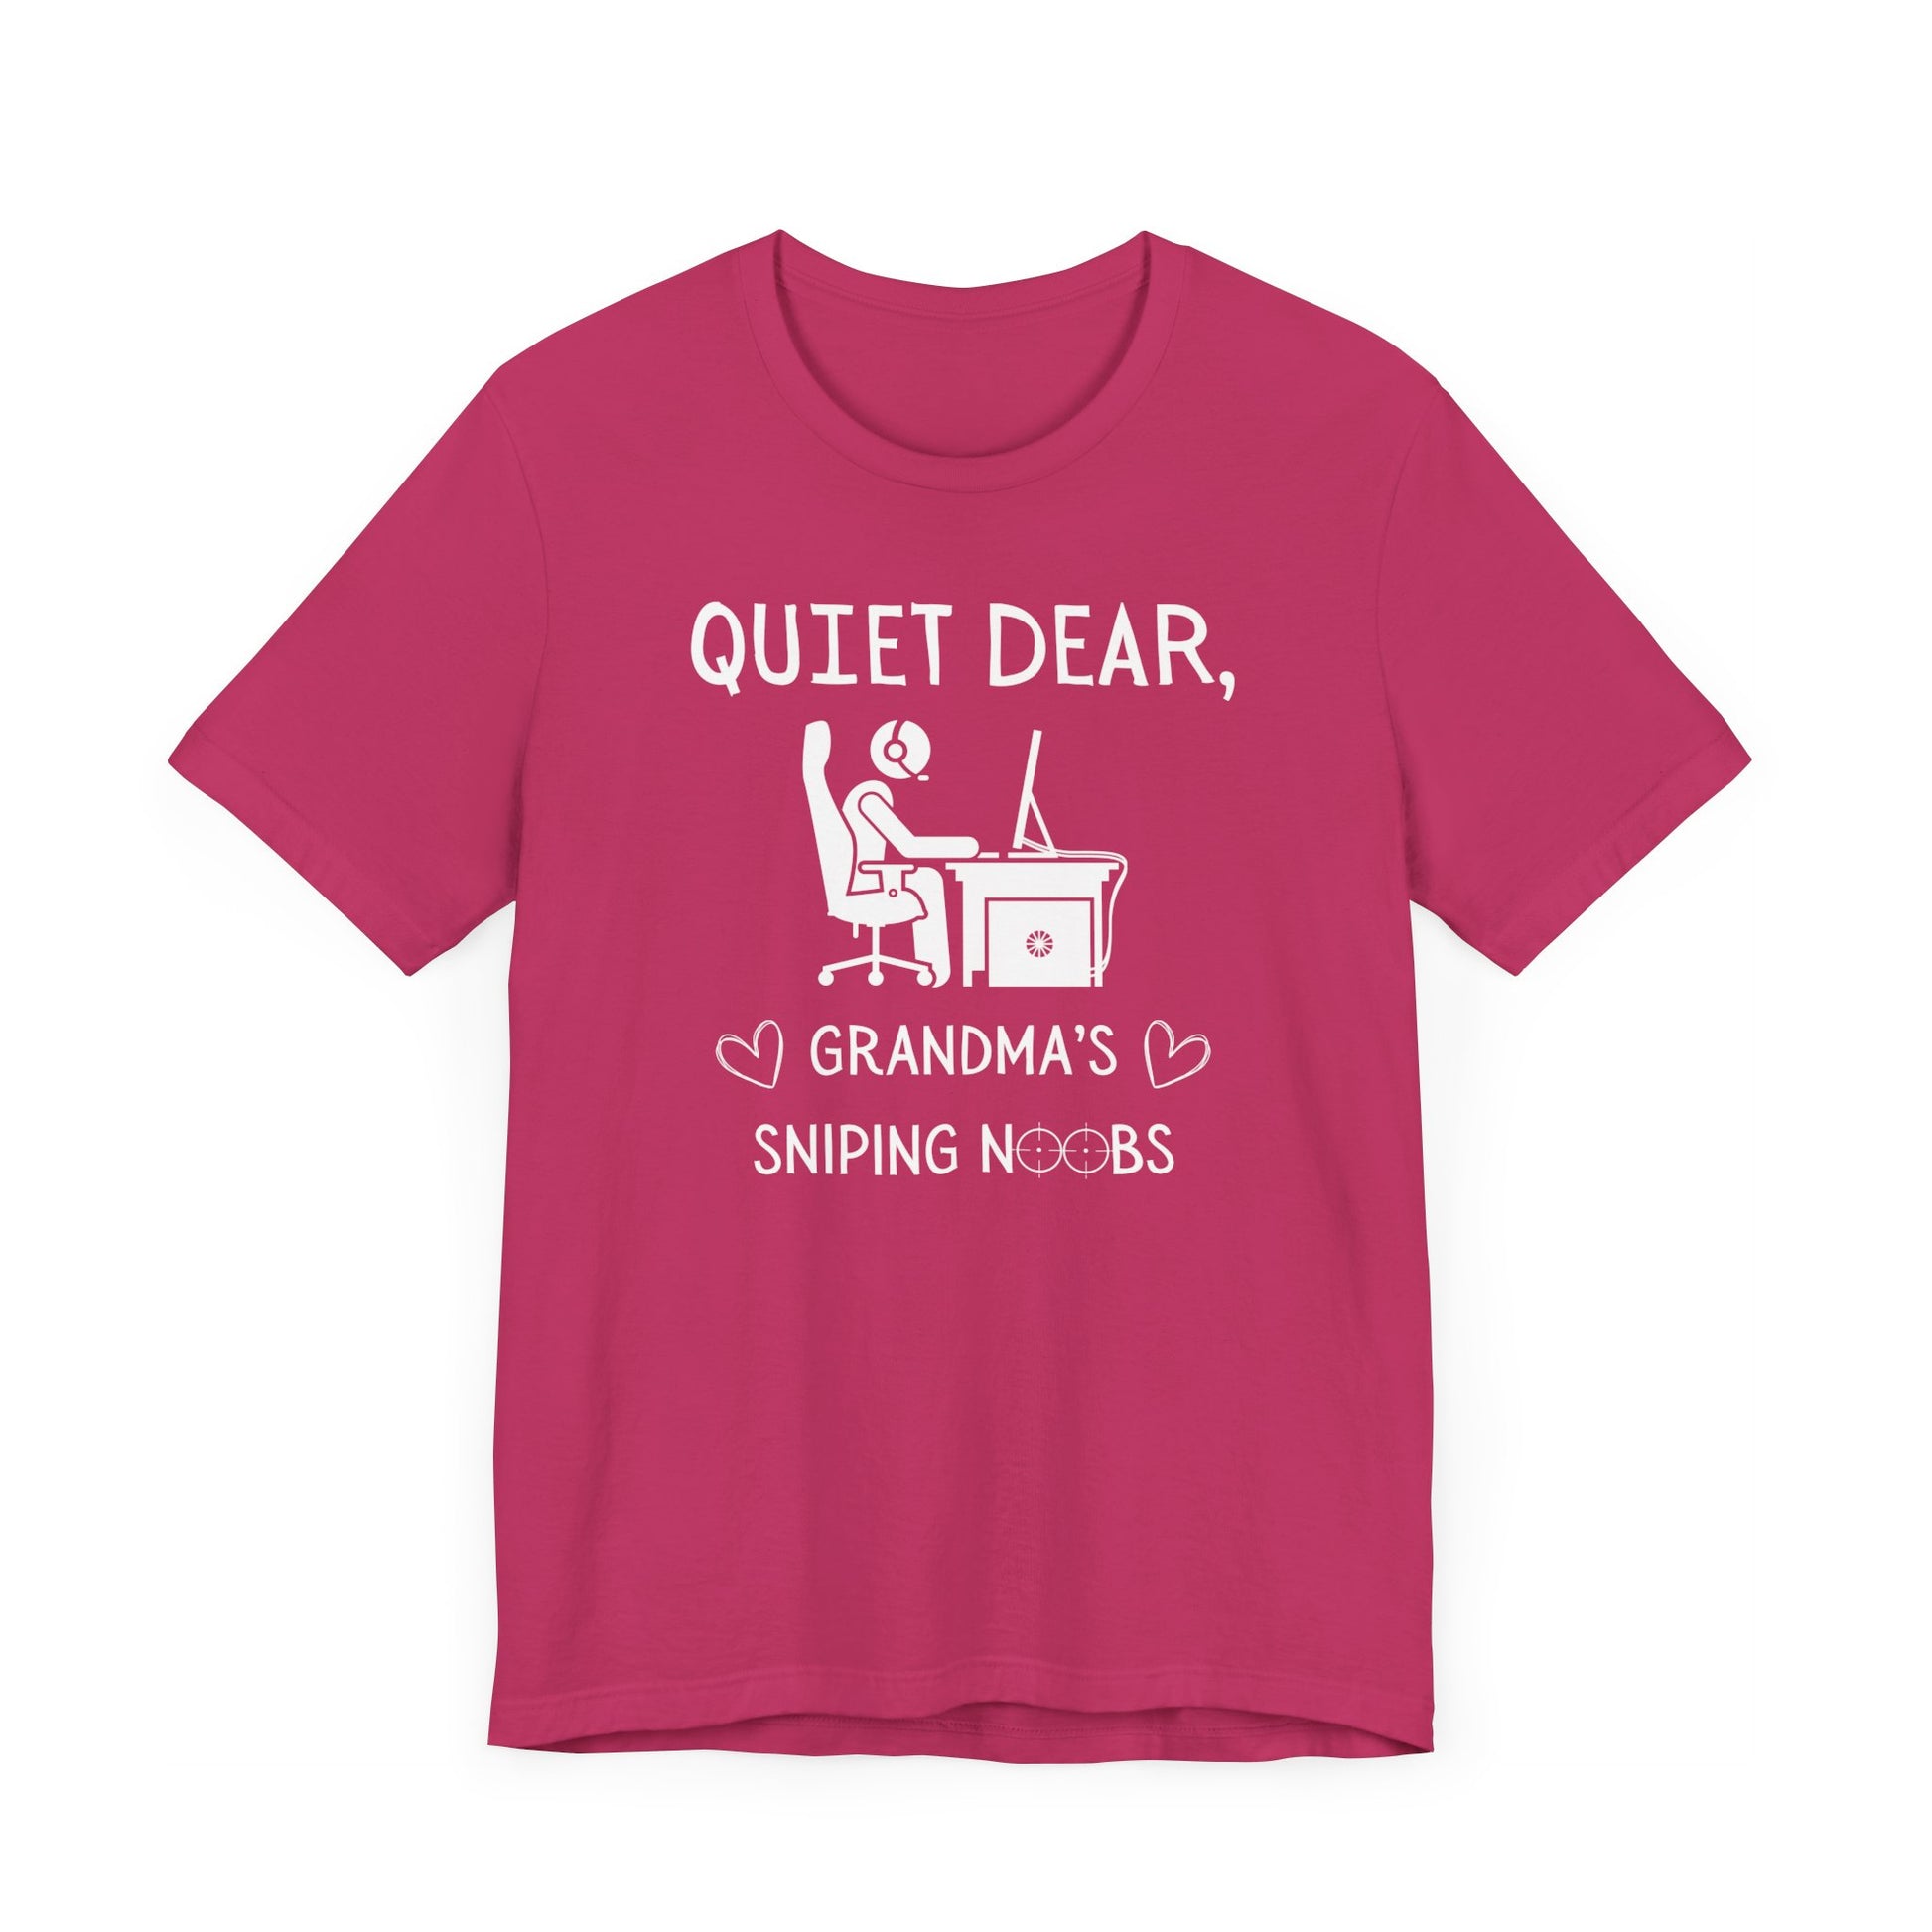 A flat image of a berry pink t-shirt that reads Quiet Dear, Grandma's Sniping Noobs in white text. The lower text is framed by two hearts, and the O's are in the shape of sniper scopes. In the center of the shirt is an image of a person at a desk with a gaming PC.